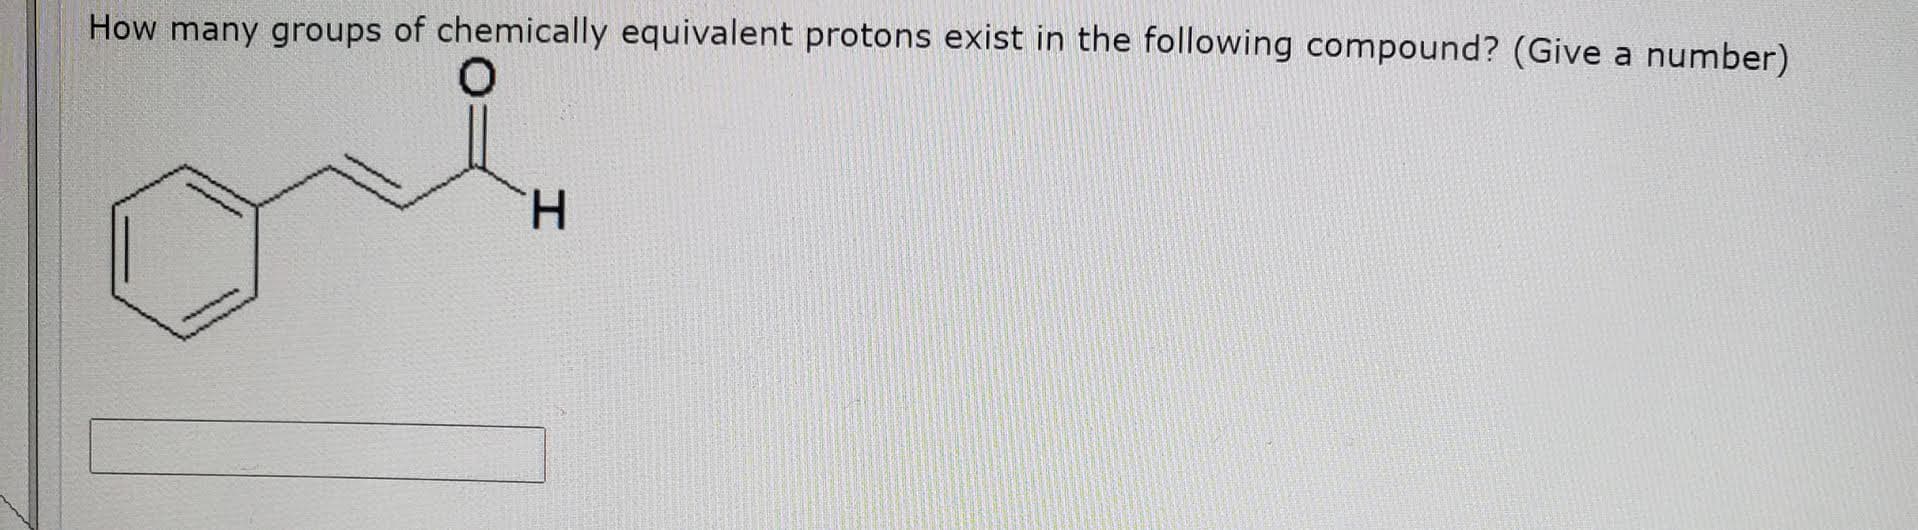 How many groups of chemically equivalent protons exist in the following compound? (Give a number)
H.
